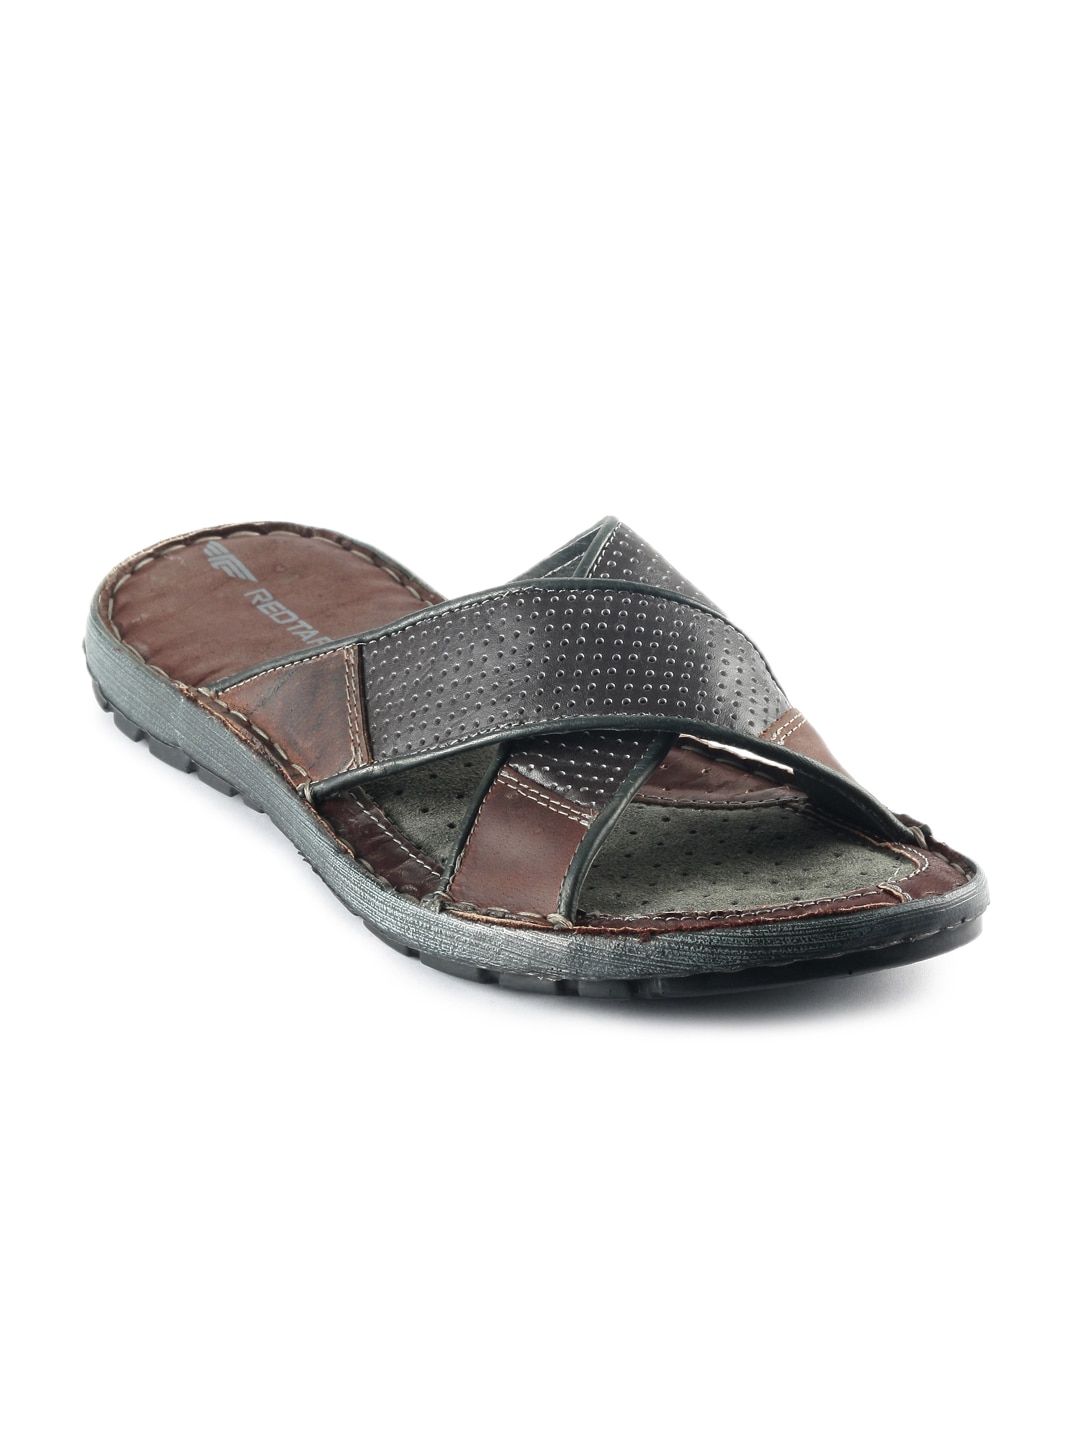 Red Tape Men Cross Band Brown Sandals